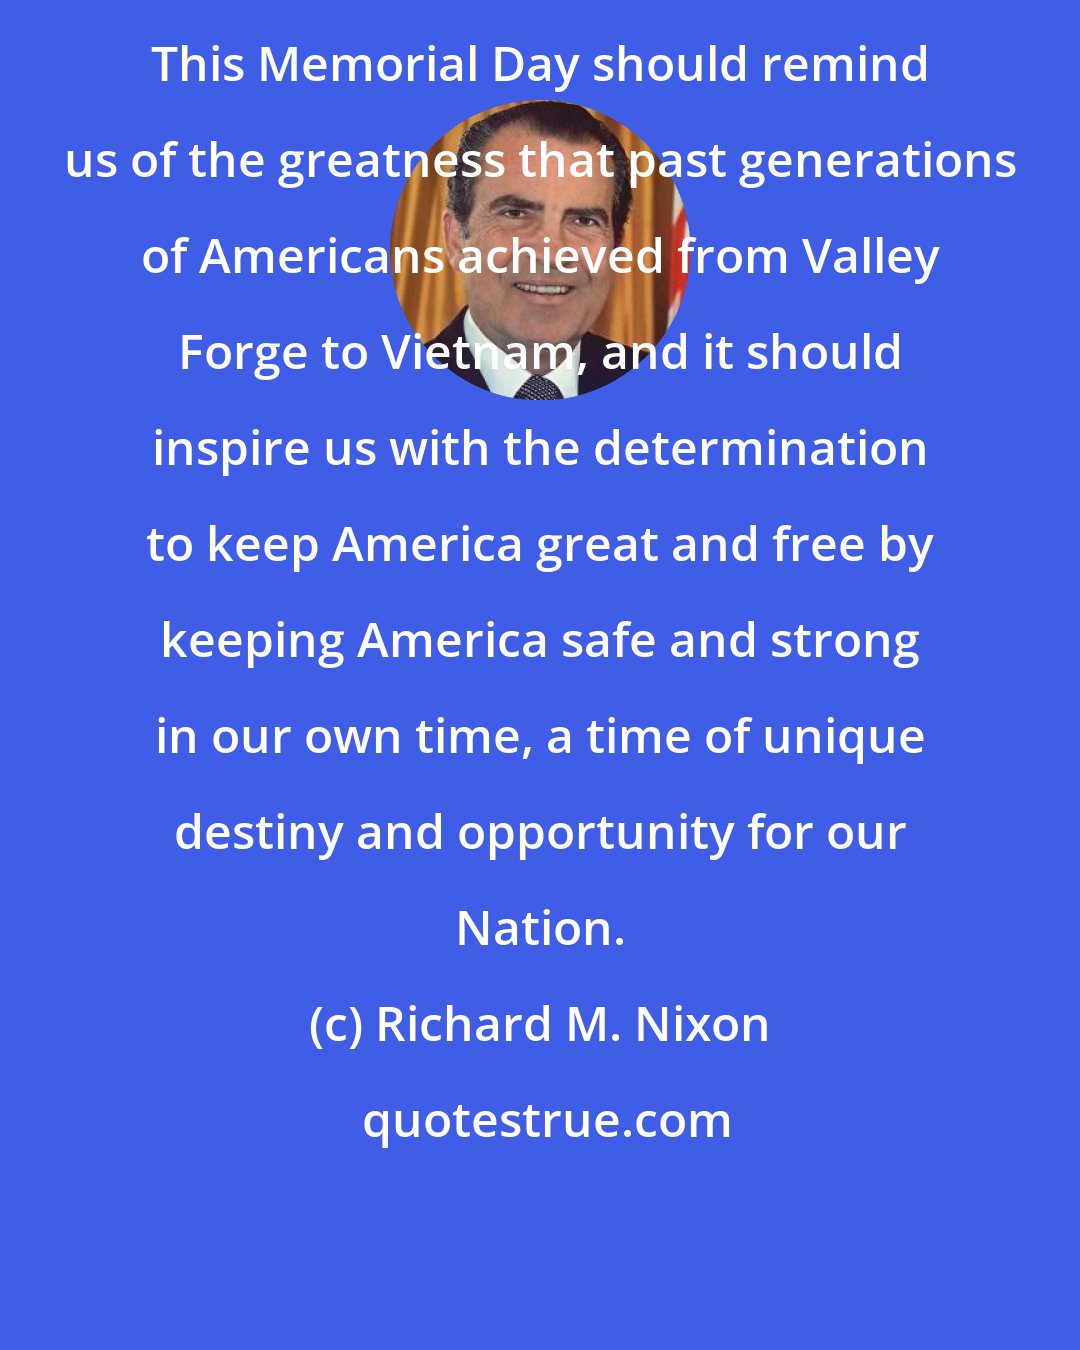 Richard M. Nixon: This Memorial Day should remind us of the greatness that past generations of Americans achieved from Valley Forge to Vietnam, and it should inspire us with the determination to keep America great and free by keeping America safe and strong in our own time, a time of unique destiny and opportunity for our Nation.